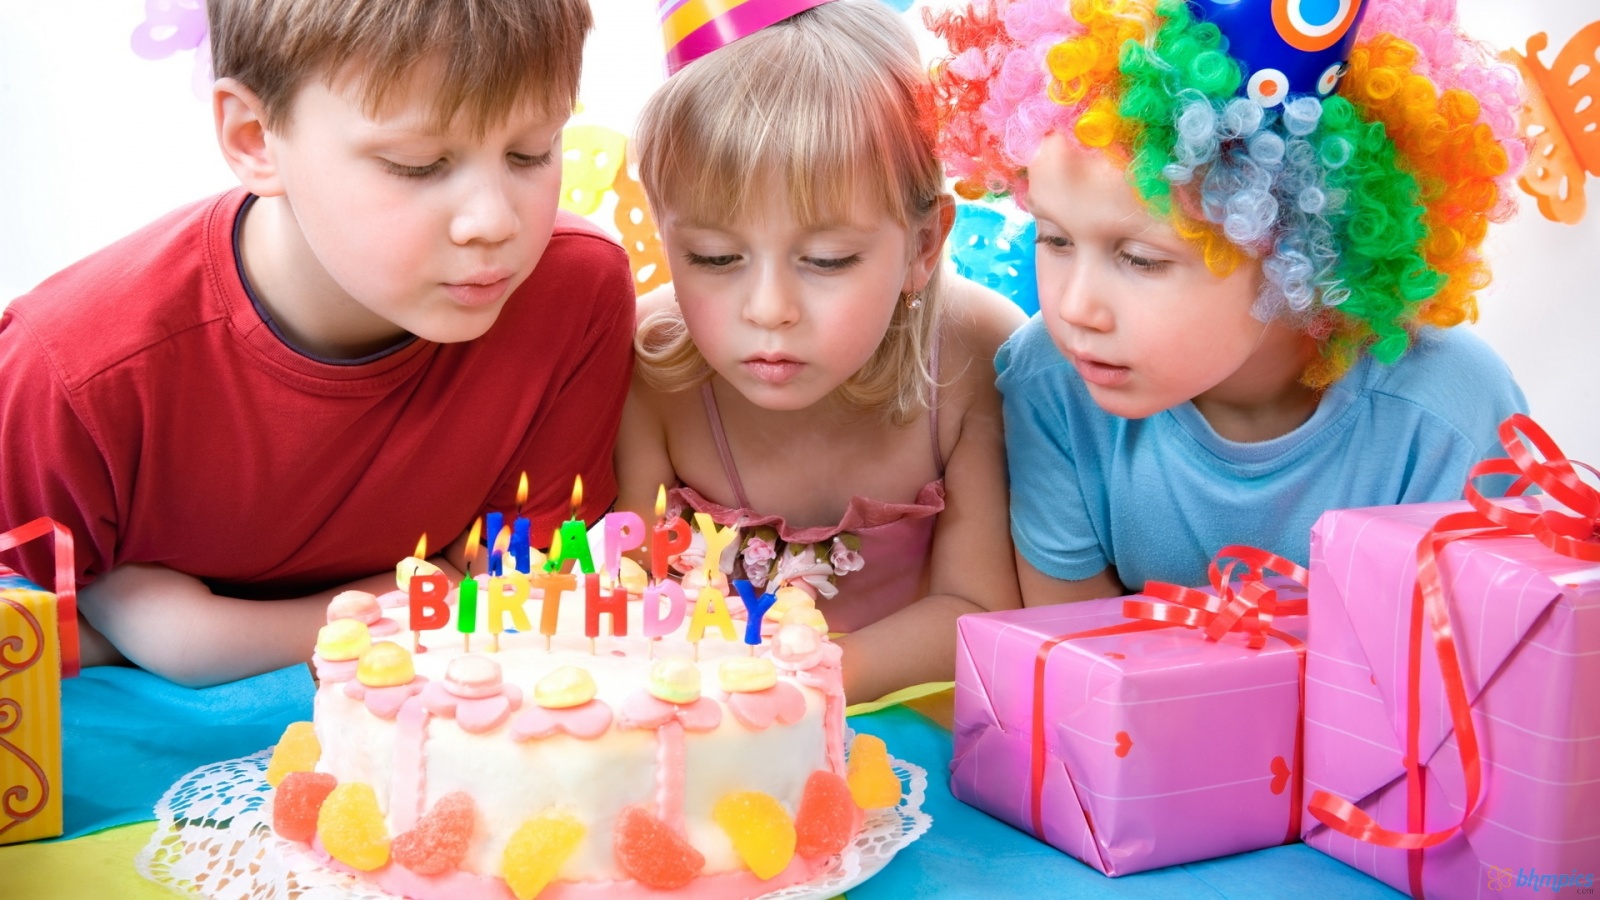 Free Download: Birthday Party